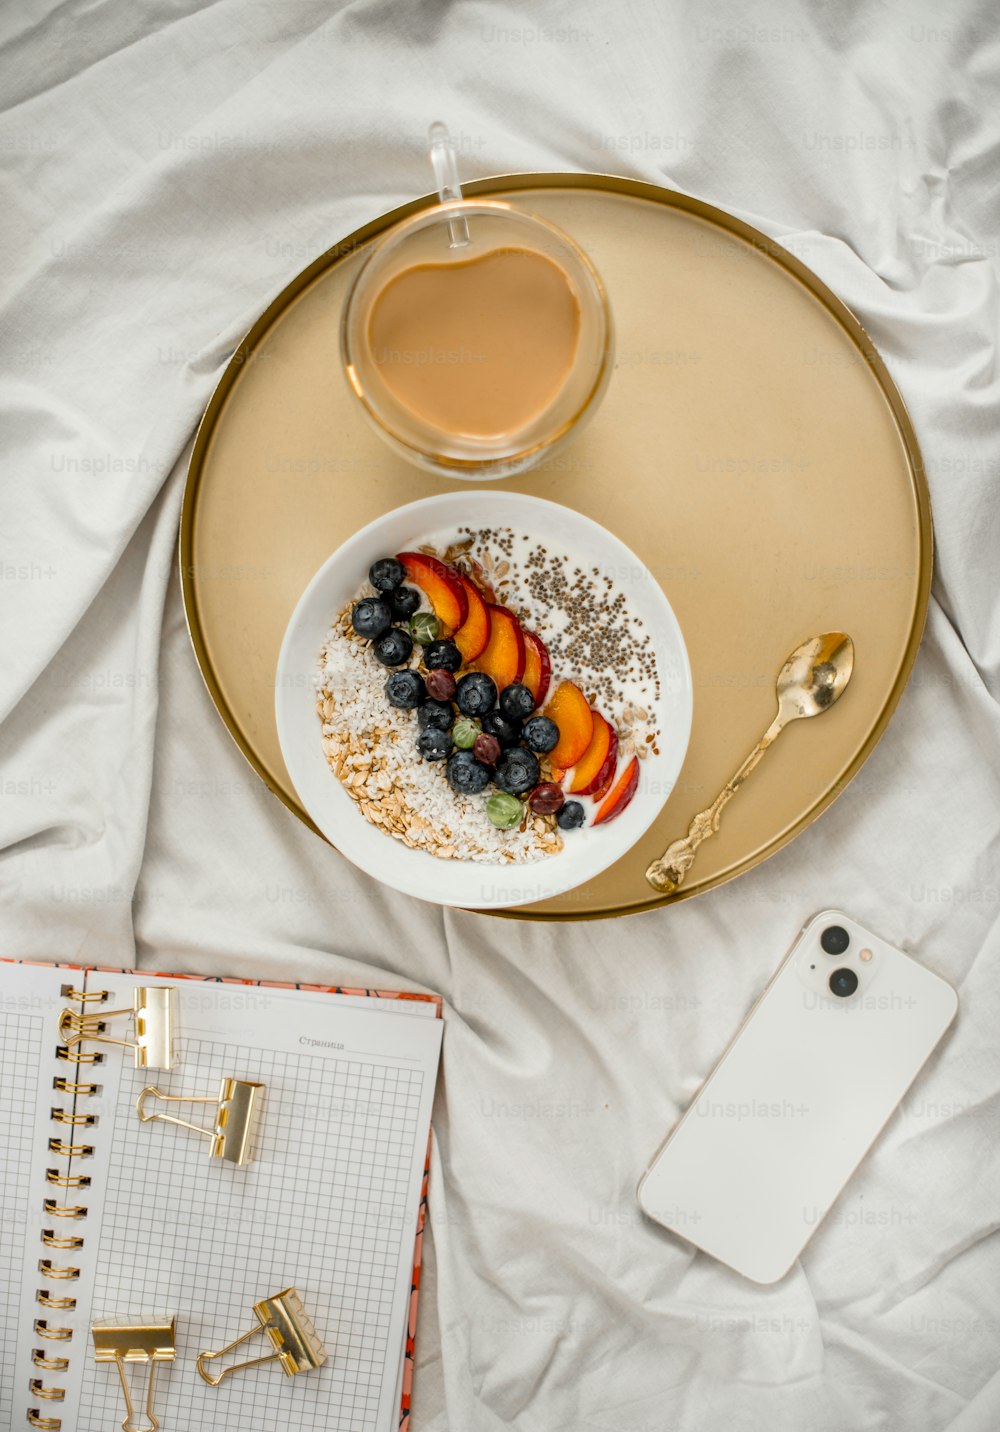 a plate of fruit and a cup of coffee on a bed